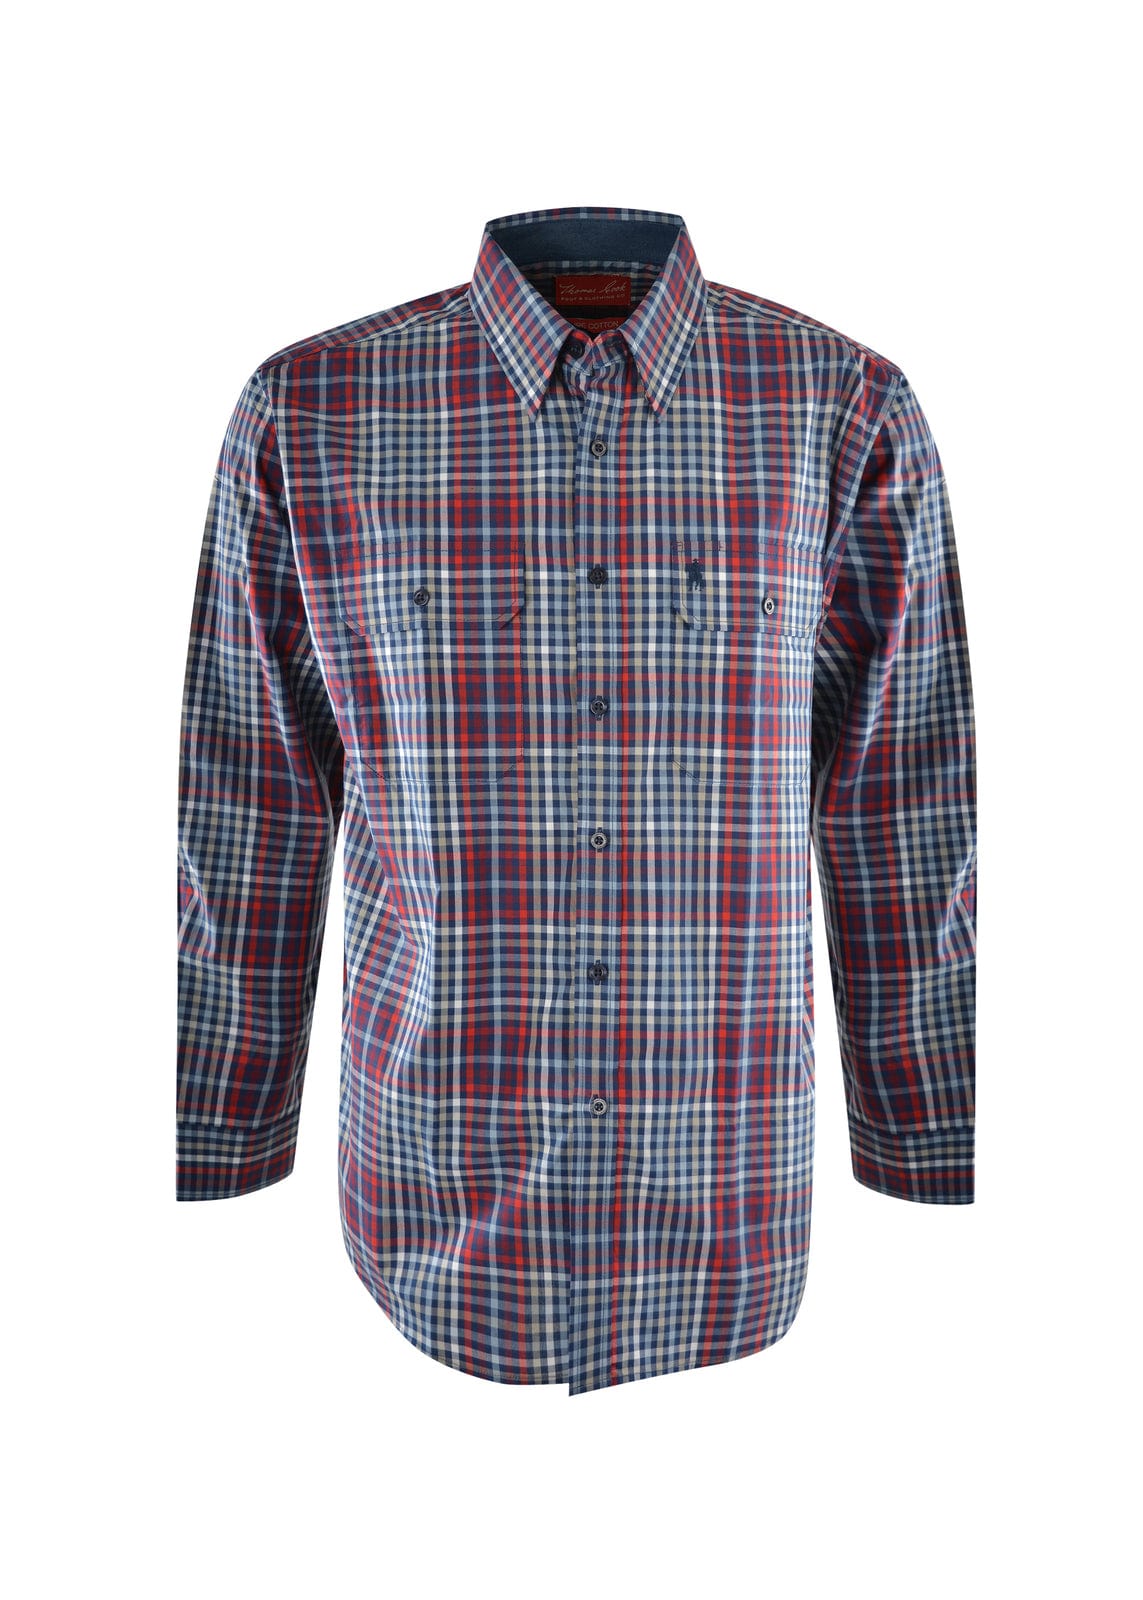 THOMAS COOK BOOTS AND CLOTHING SHIRTS T1W1115111 Mens Crofton Check | Navy/Red